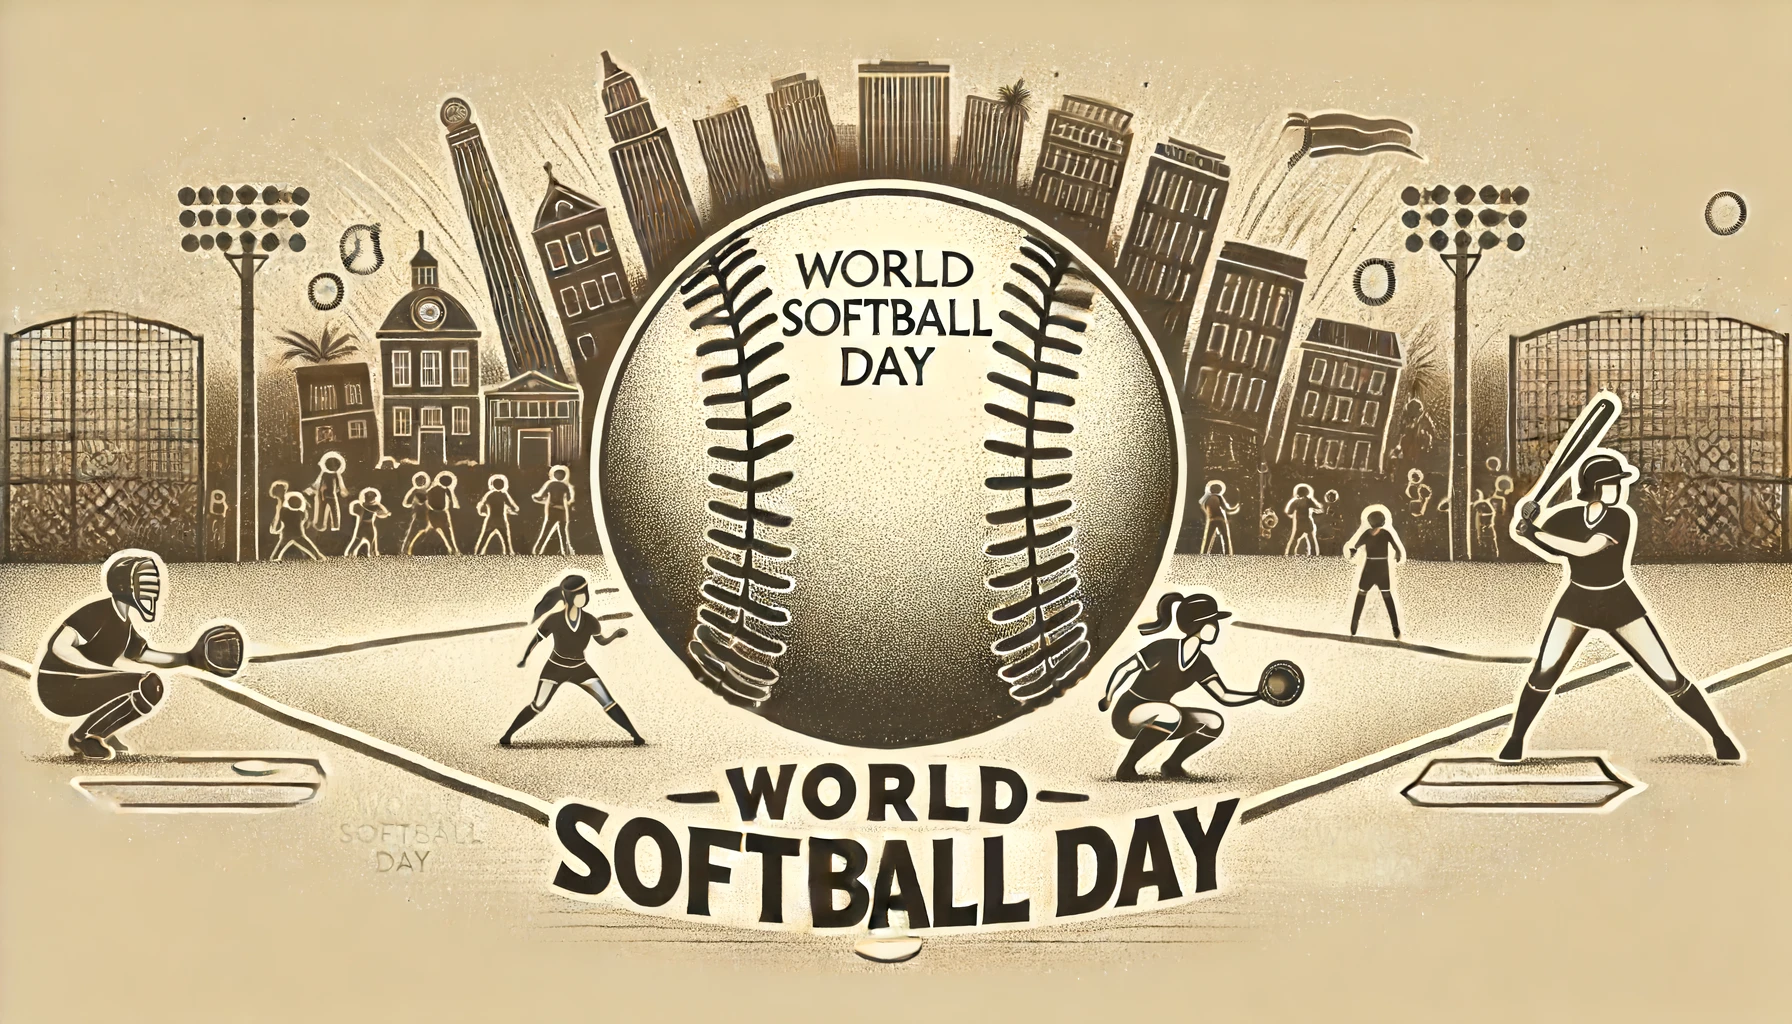 World Softball Day: Messages for Players and Fans